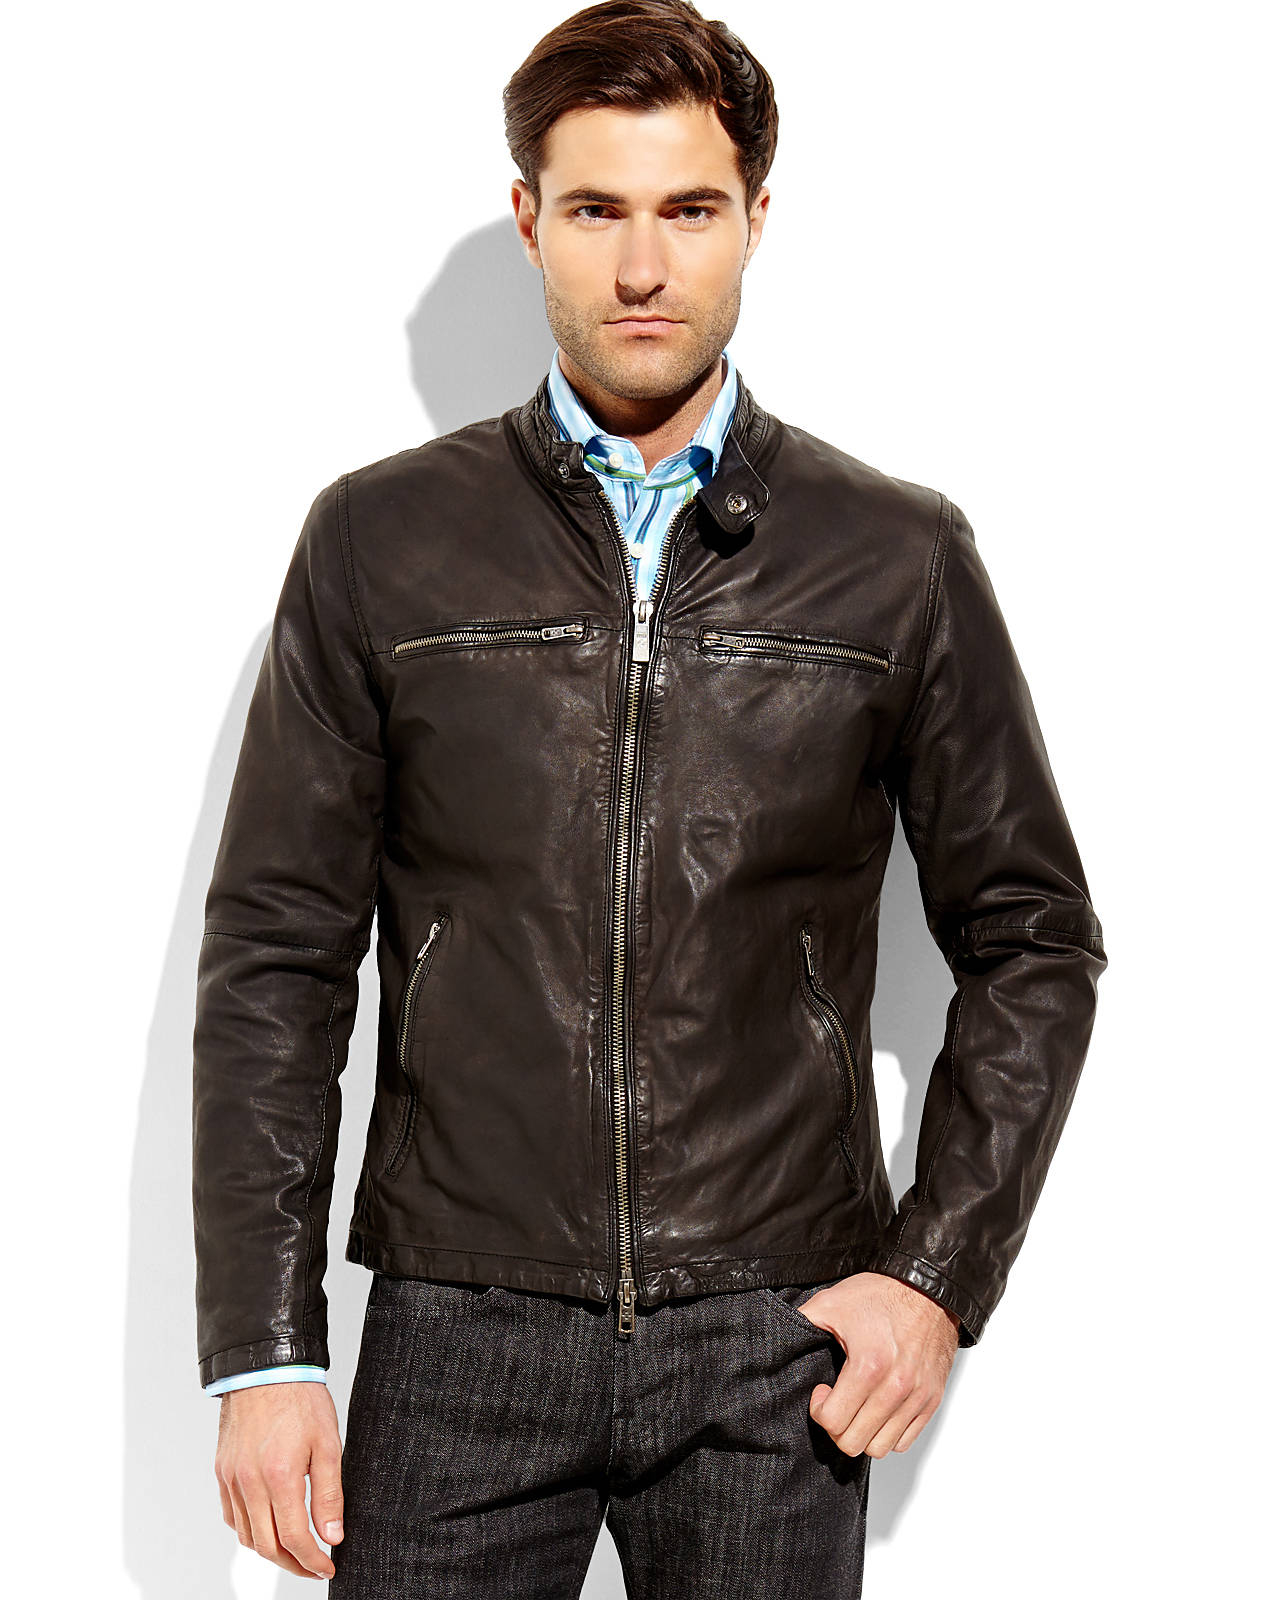 Vince Camuto FourPocket Leather Motorcycle Jacket in